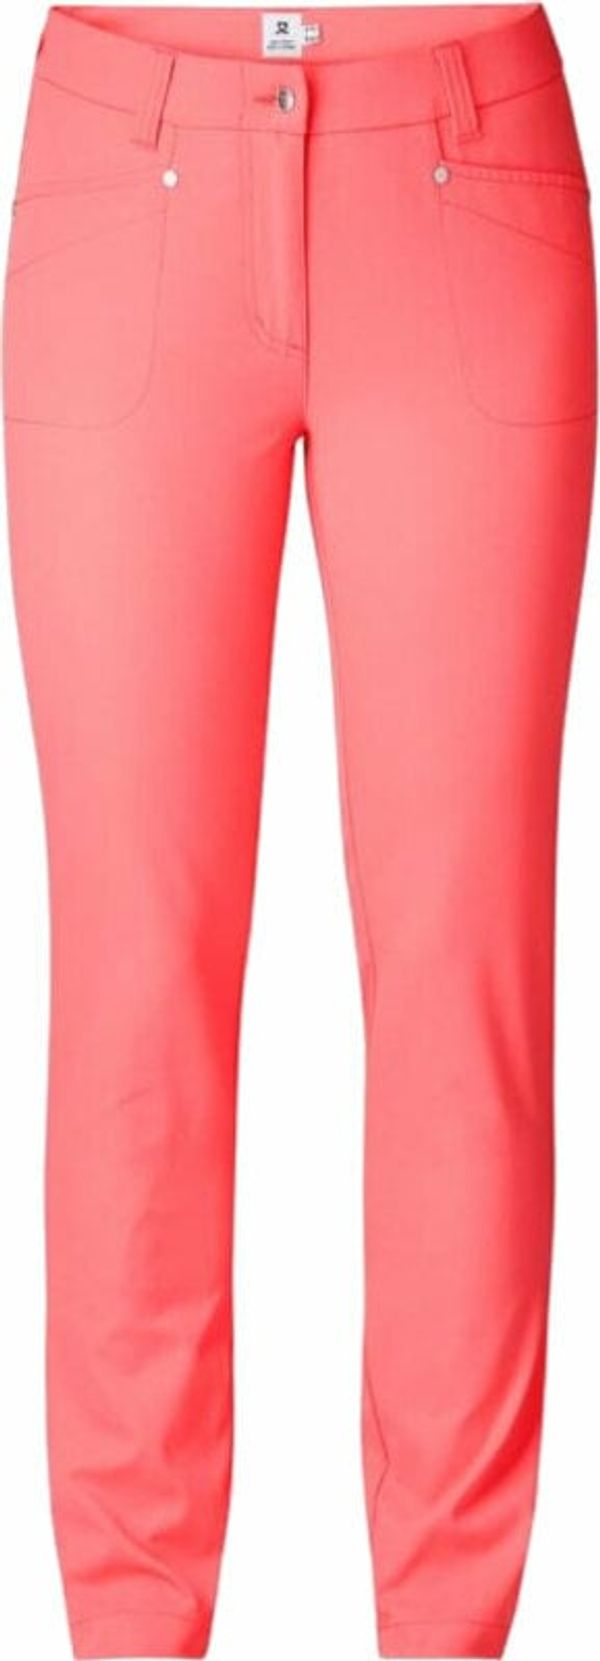 Daily Sports Daily Sports Lyric Pants 29" Coral 32